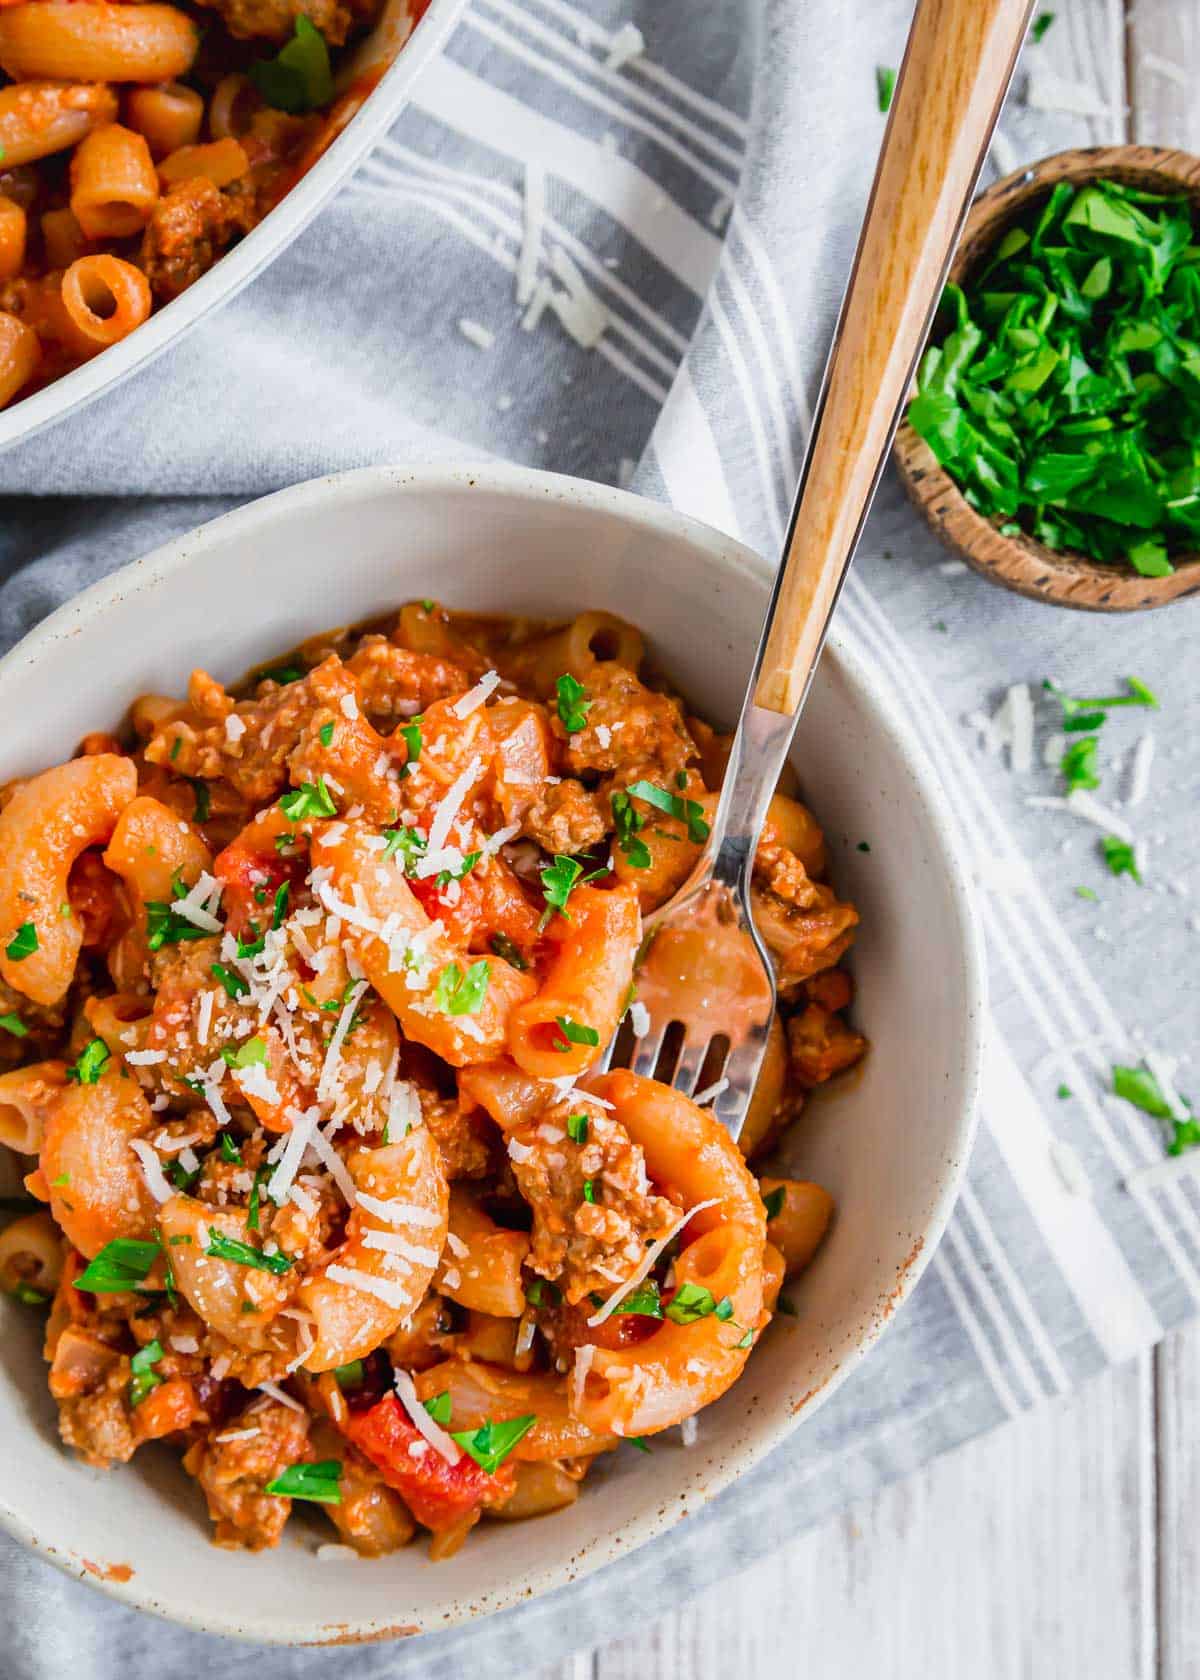 Ground beef and pasta recipe in a bowl with a fork.